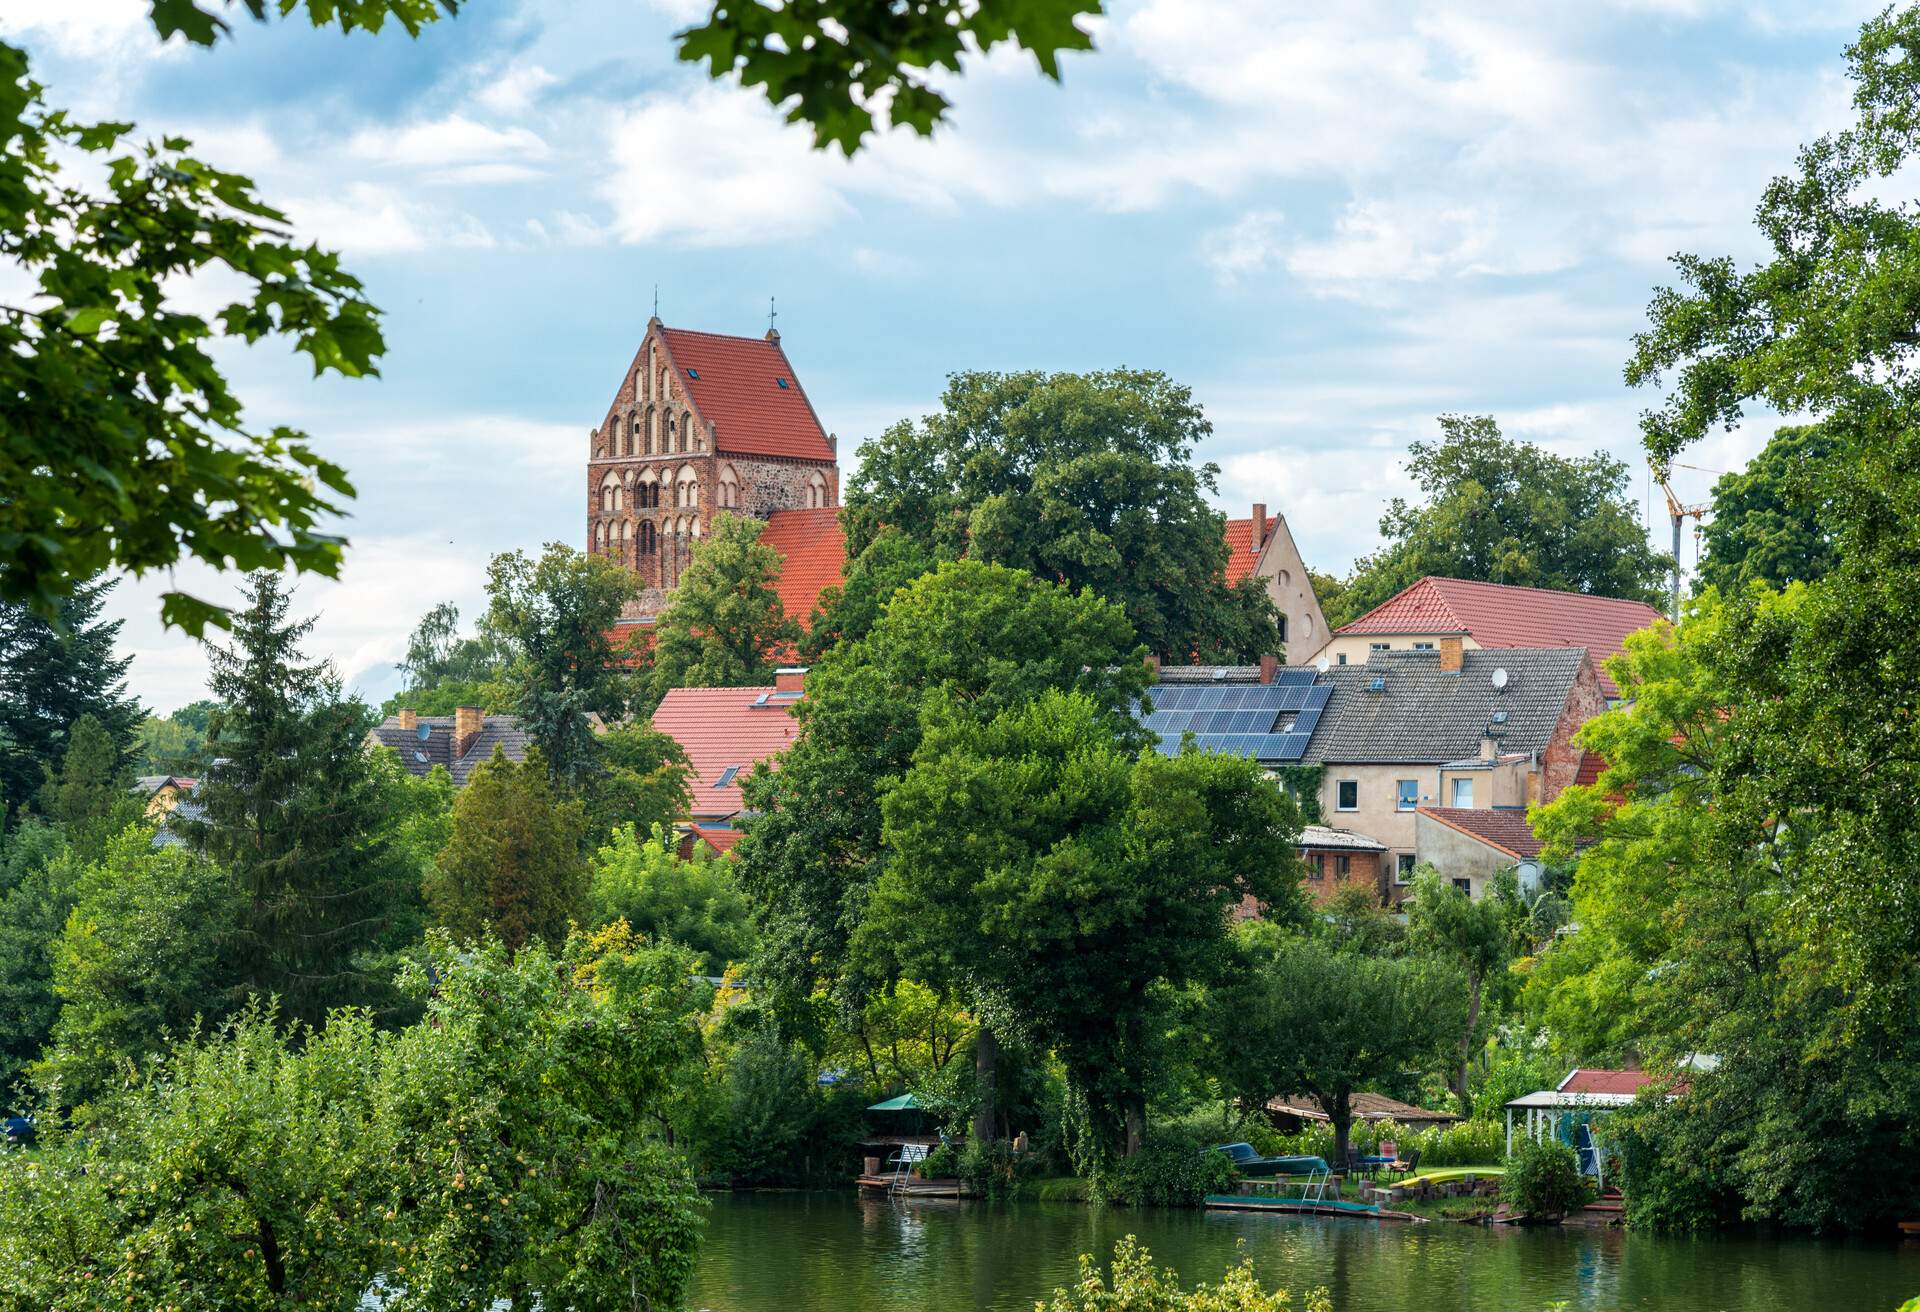 Village houses and a church hidden behind the trees along the shores of a lake.